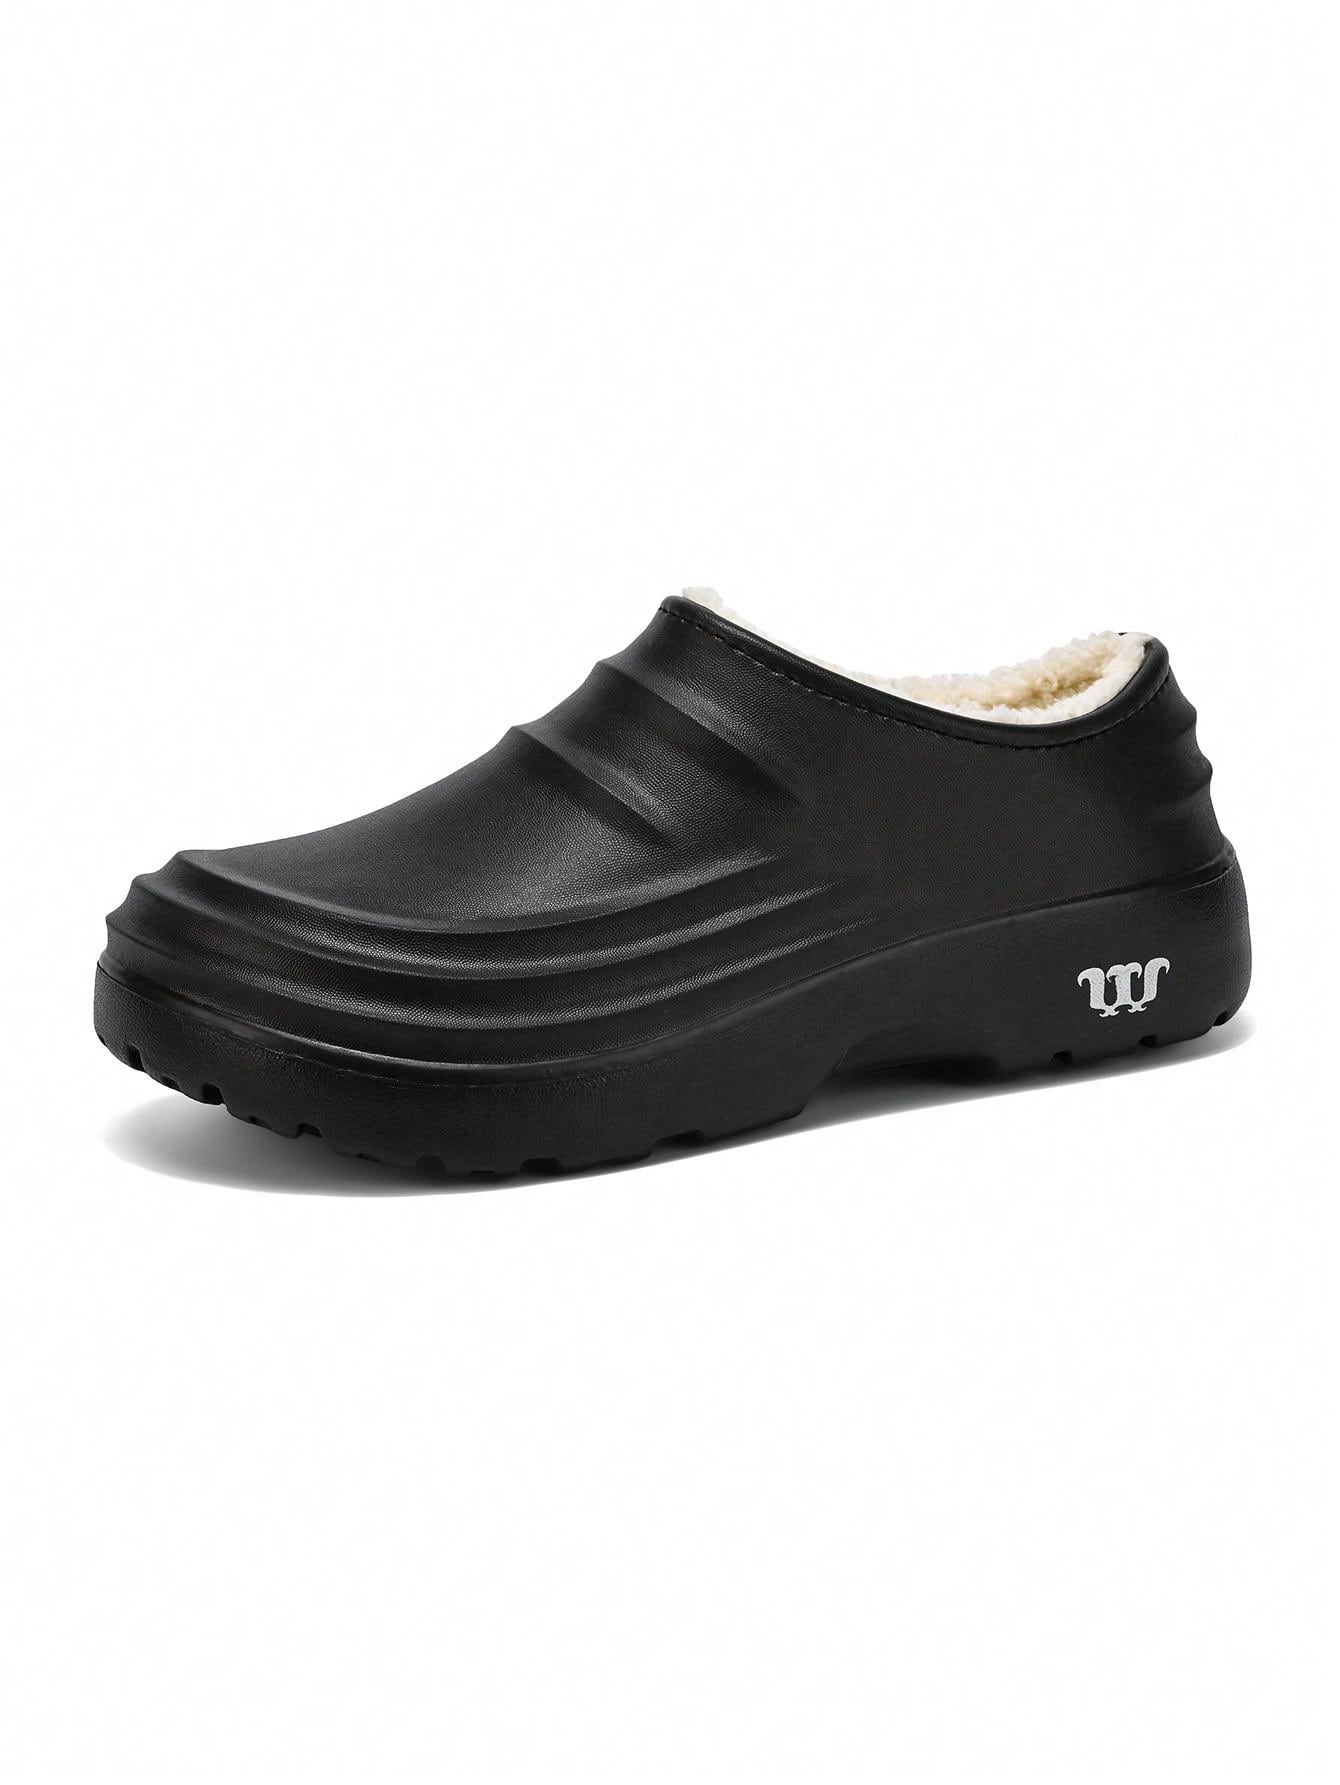 Men's Waterproof, Slip Resistant, Oil Resistant, Skidproof, And Wear-resistant Chef Shoes In The Kitchen